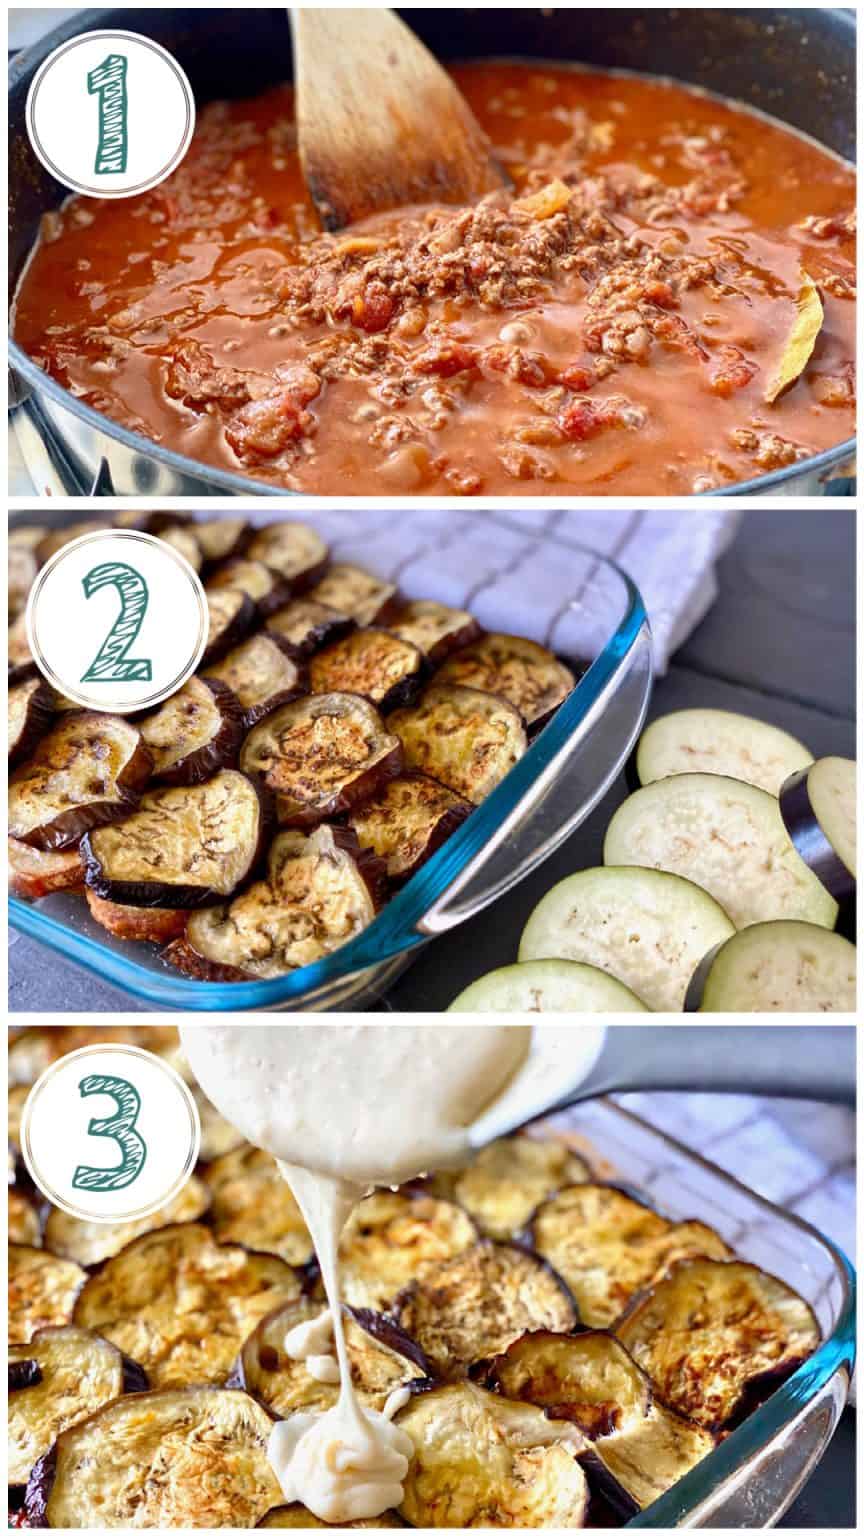 Traditional Moussaka recipe with eggplants (aubergines) and potatoes ...